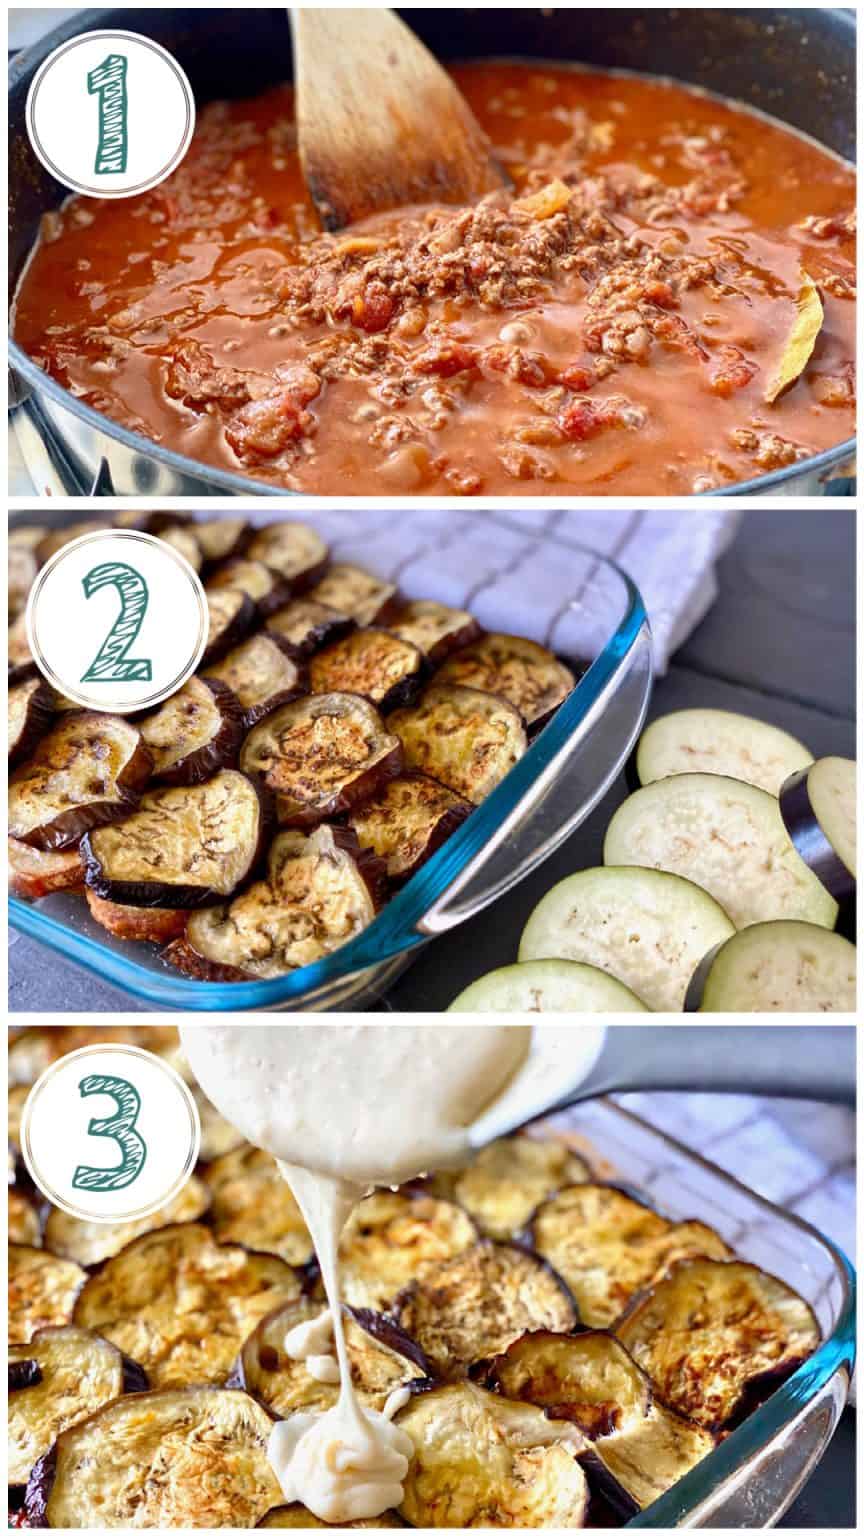 Traditional Moussaka recipe with eggplants (aubergines) and potatoes ...